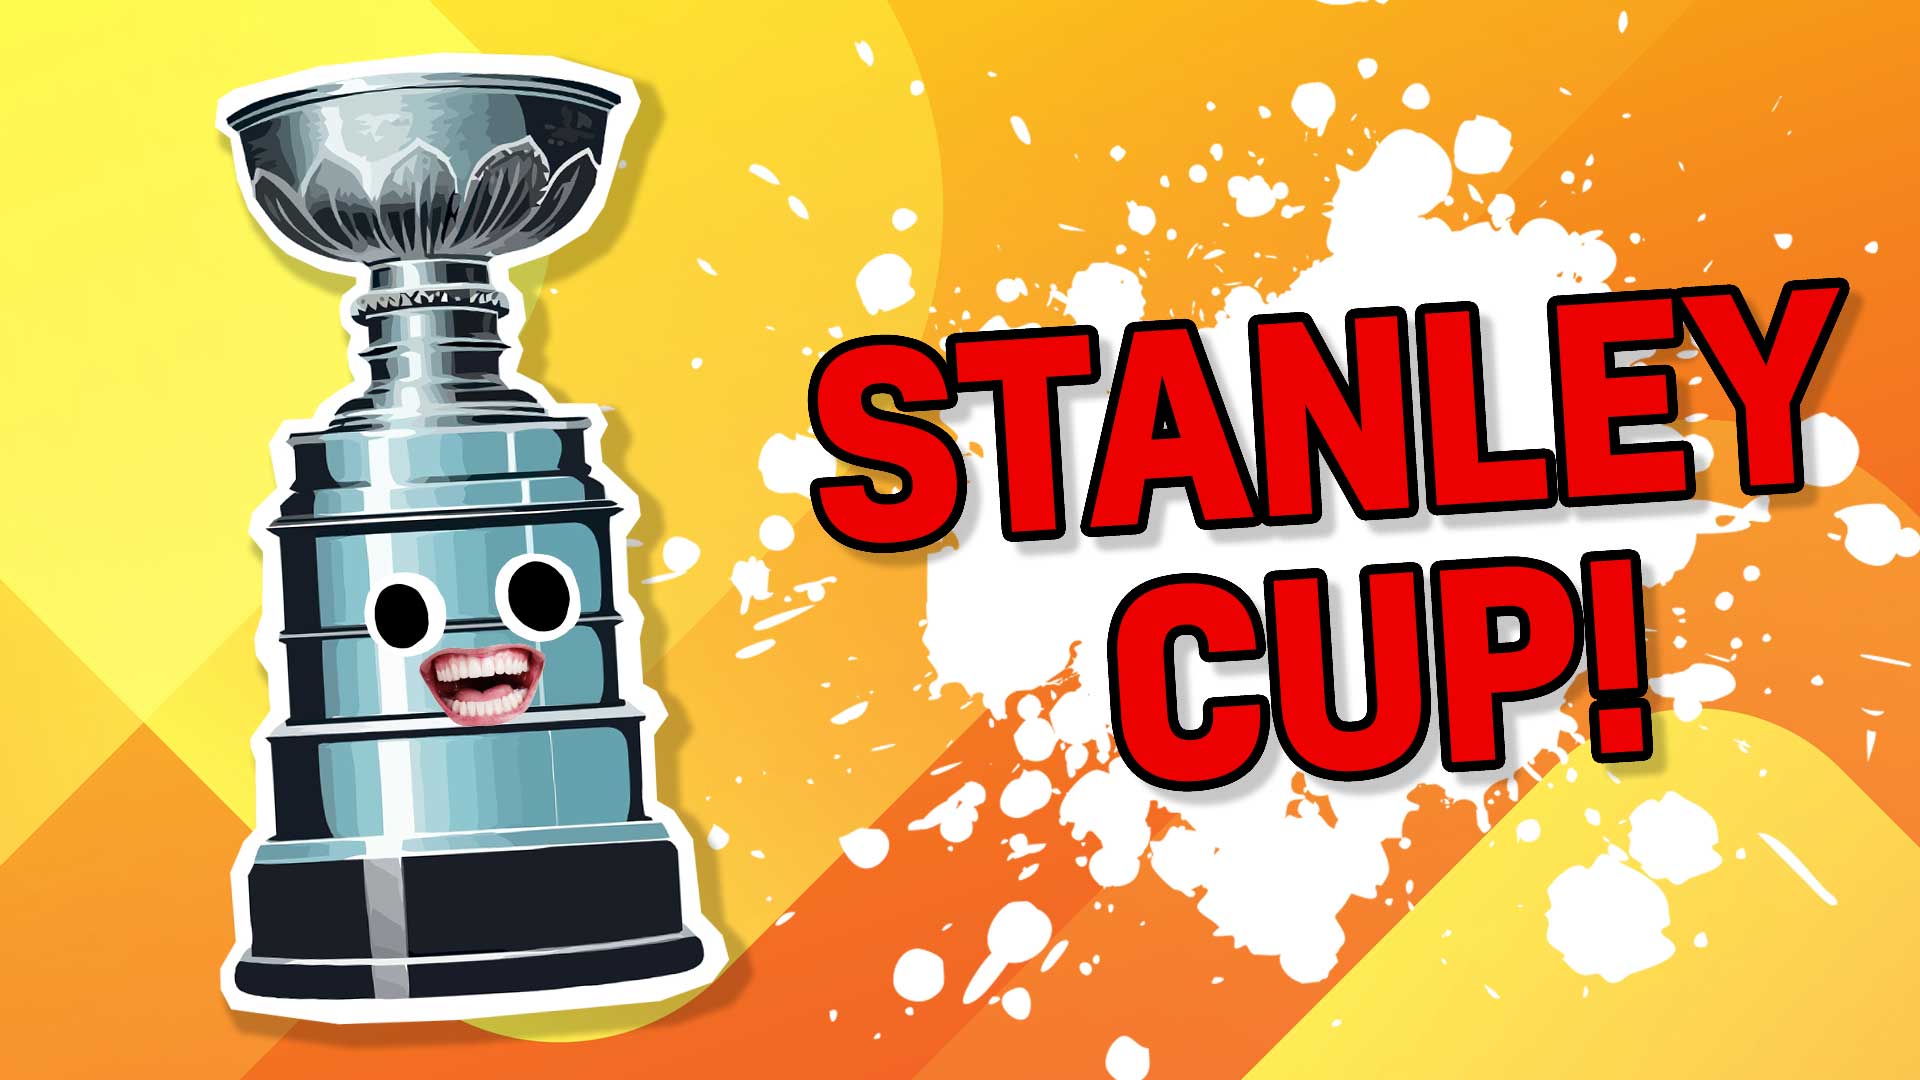 You are the Stanley Cup!